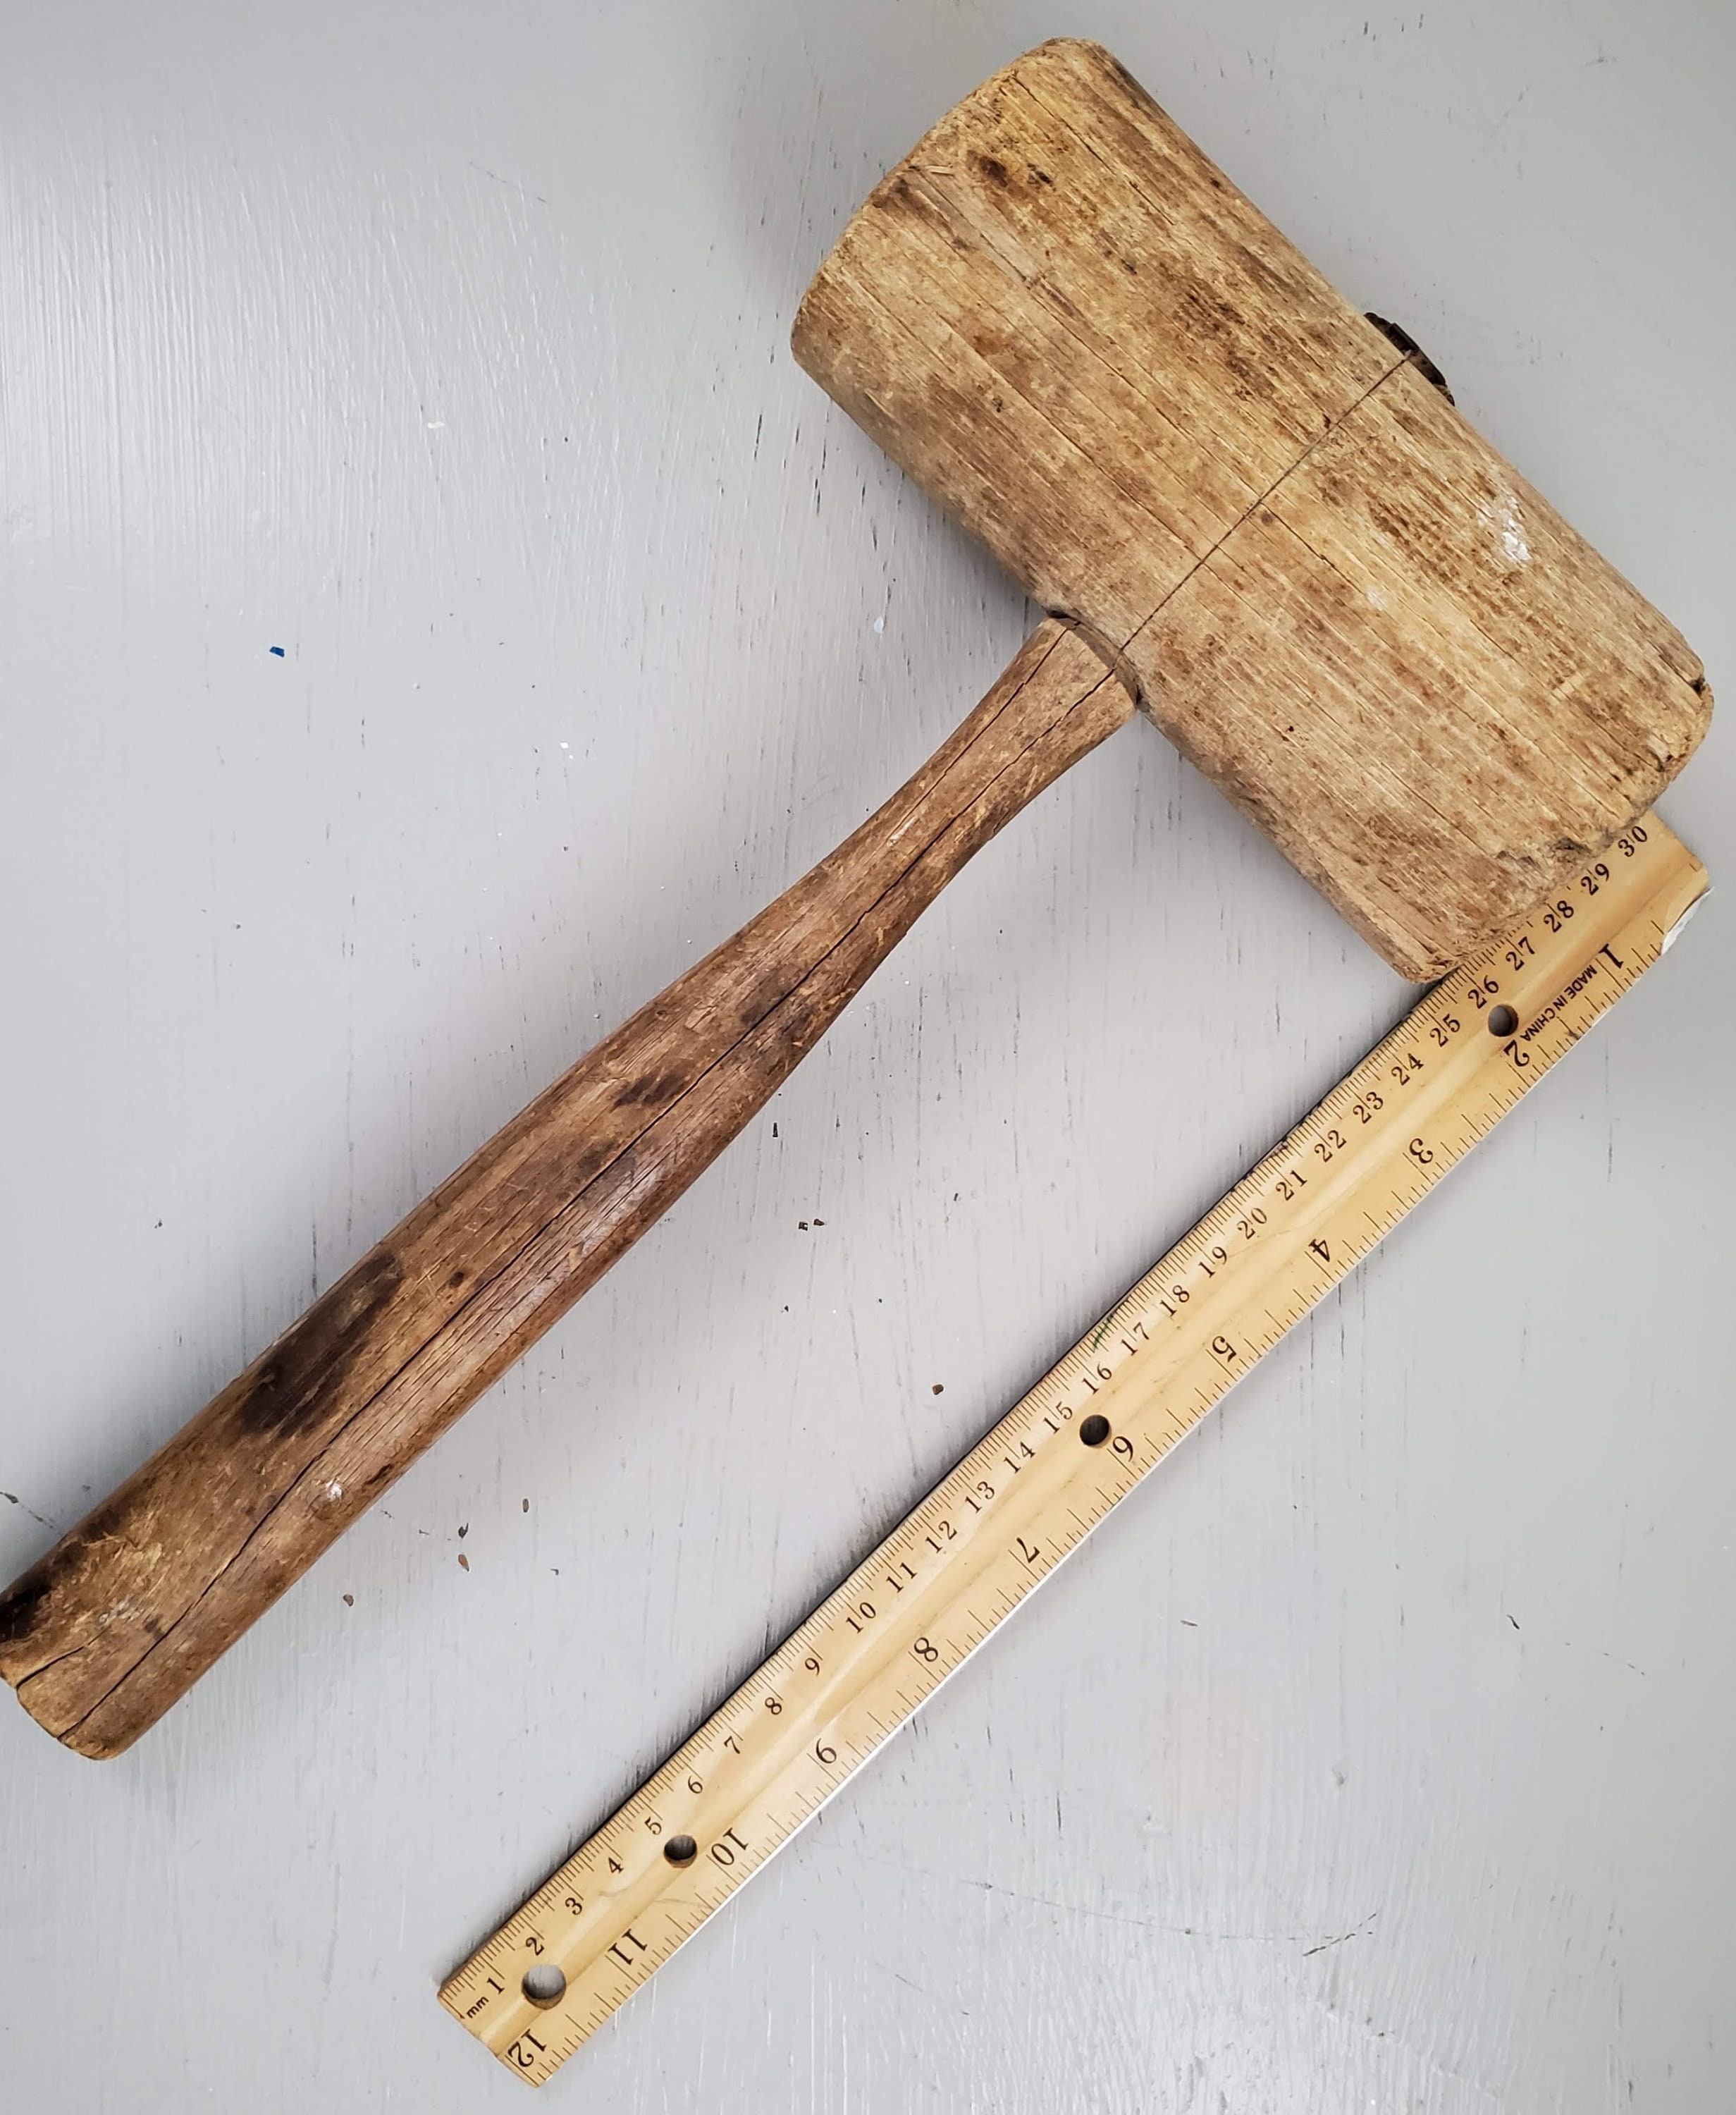 At Auction: Vintage Wood And Metal Tiny Hammer Or Mallet